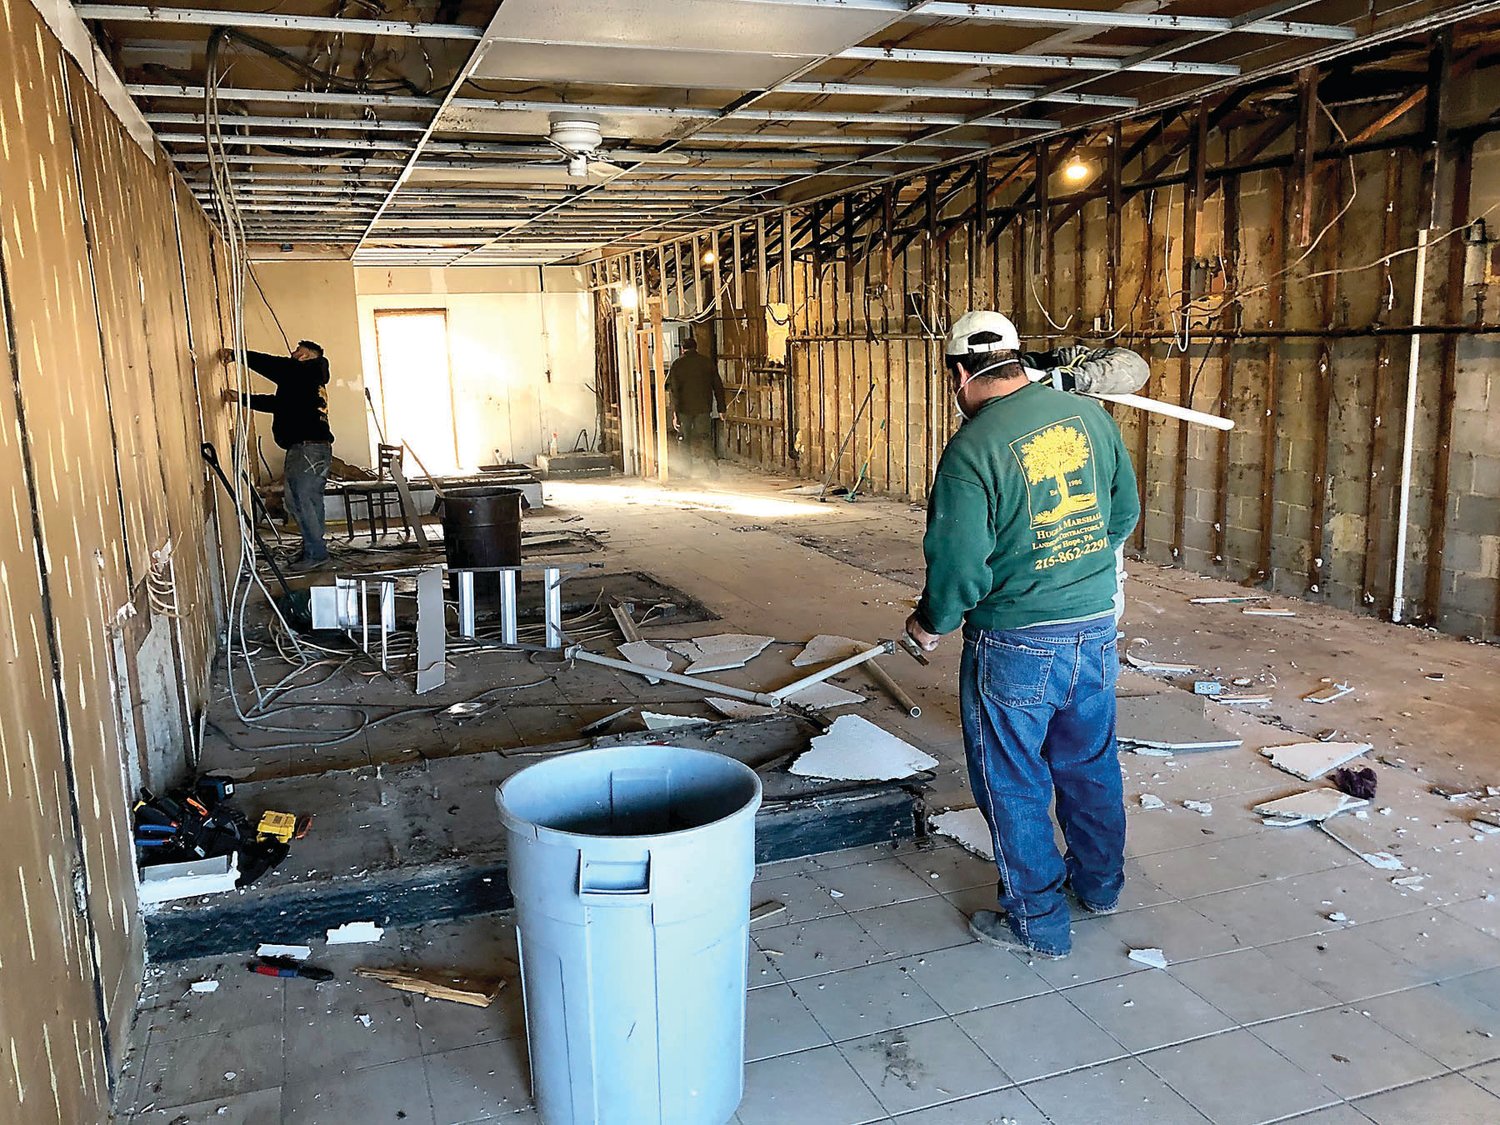 Workers have gutted the space that held a laundromat to make way for storage space for the Delaware Valley Food Pantry.